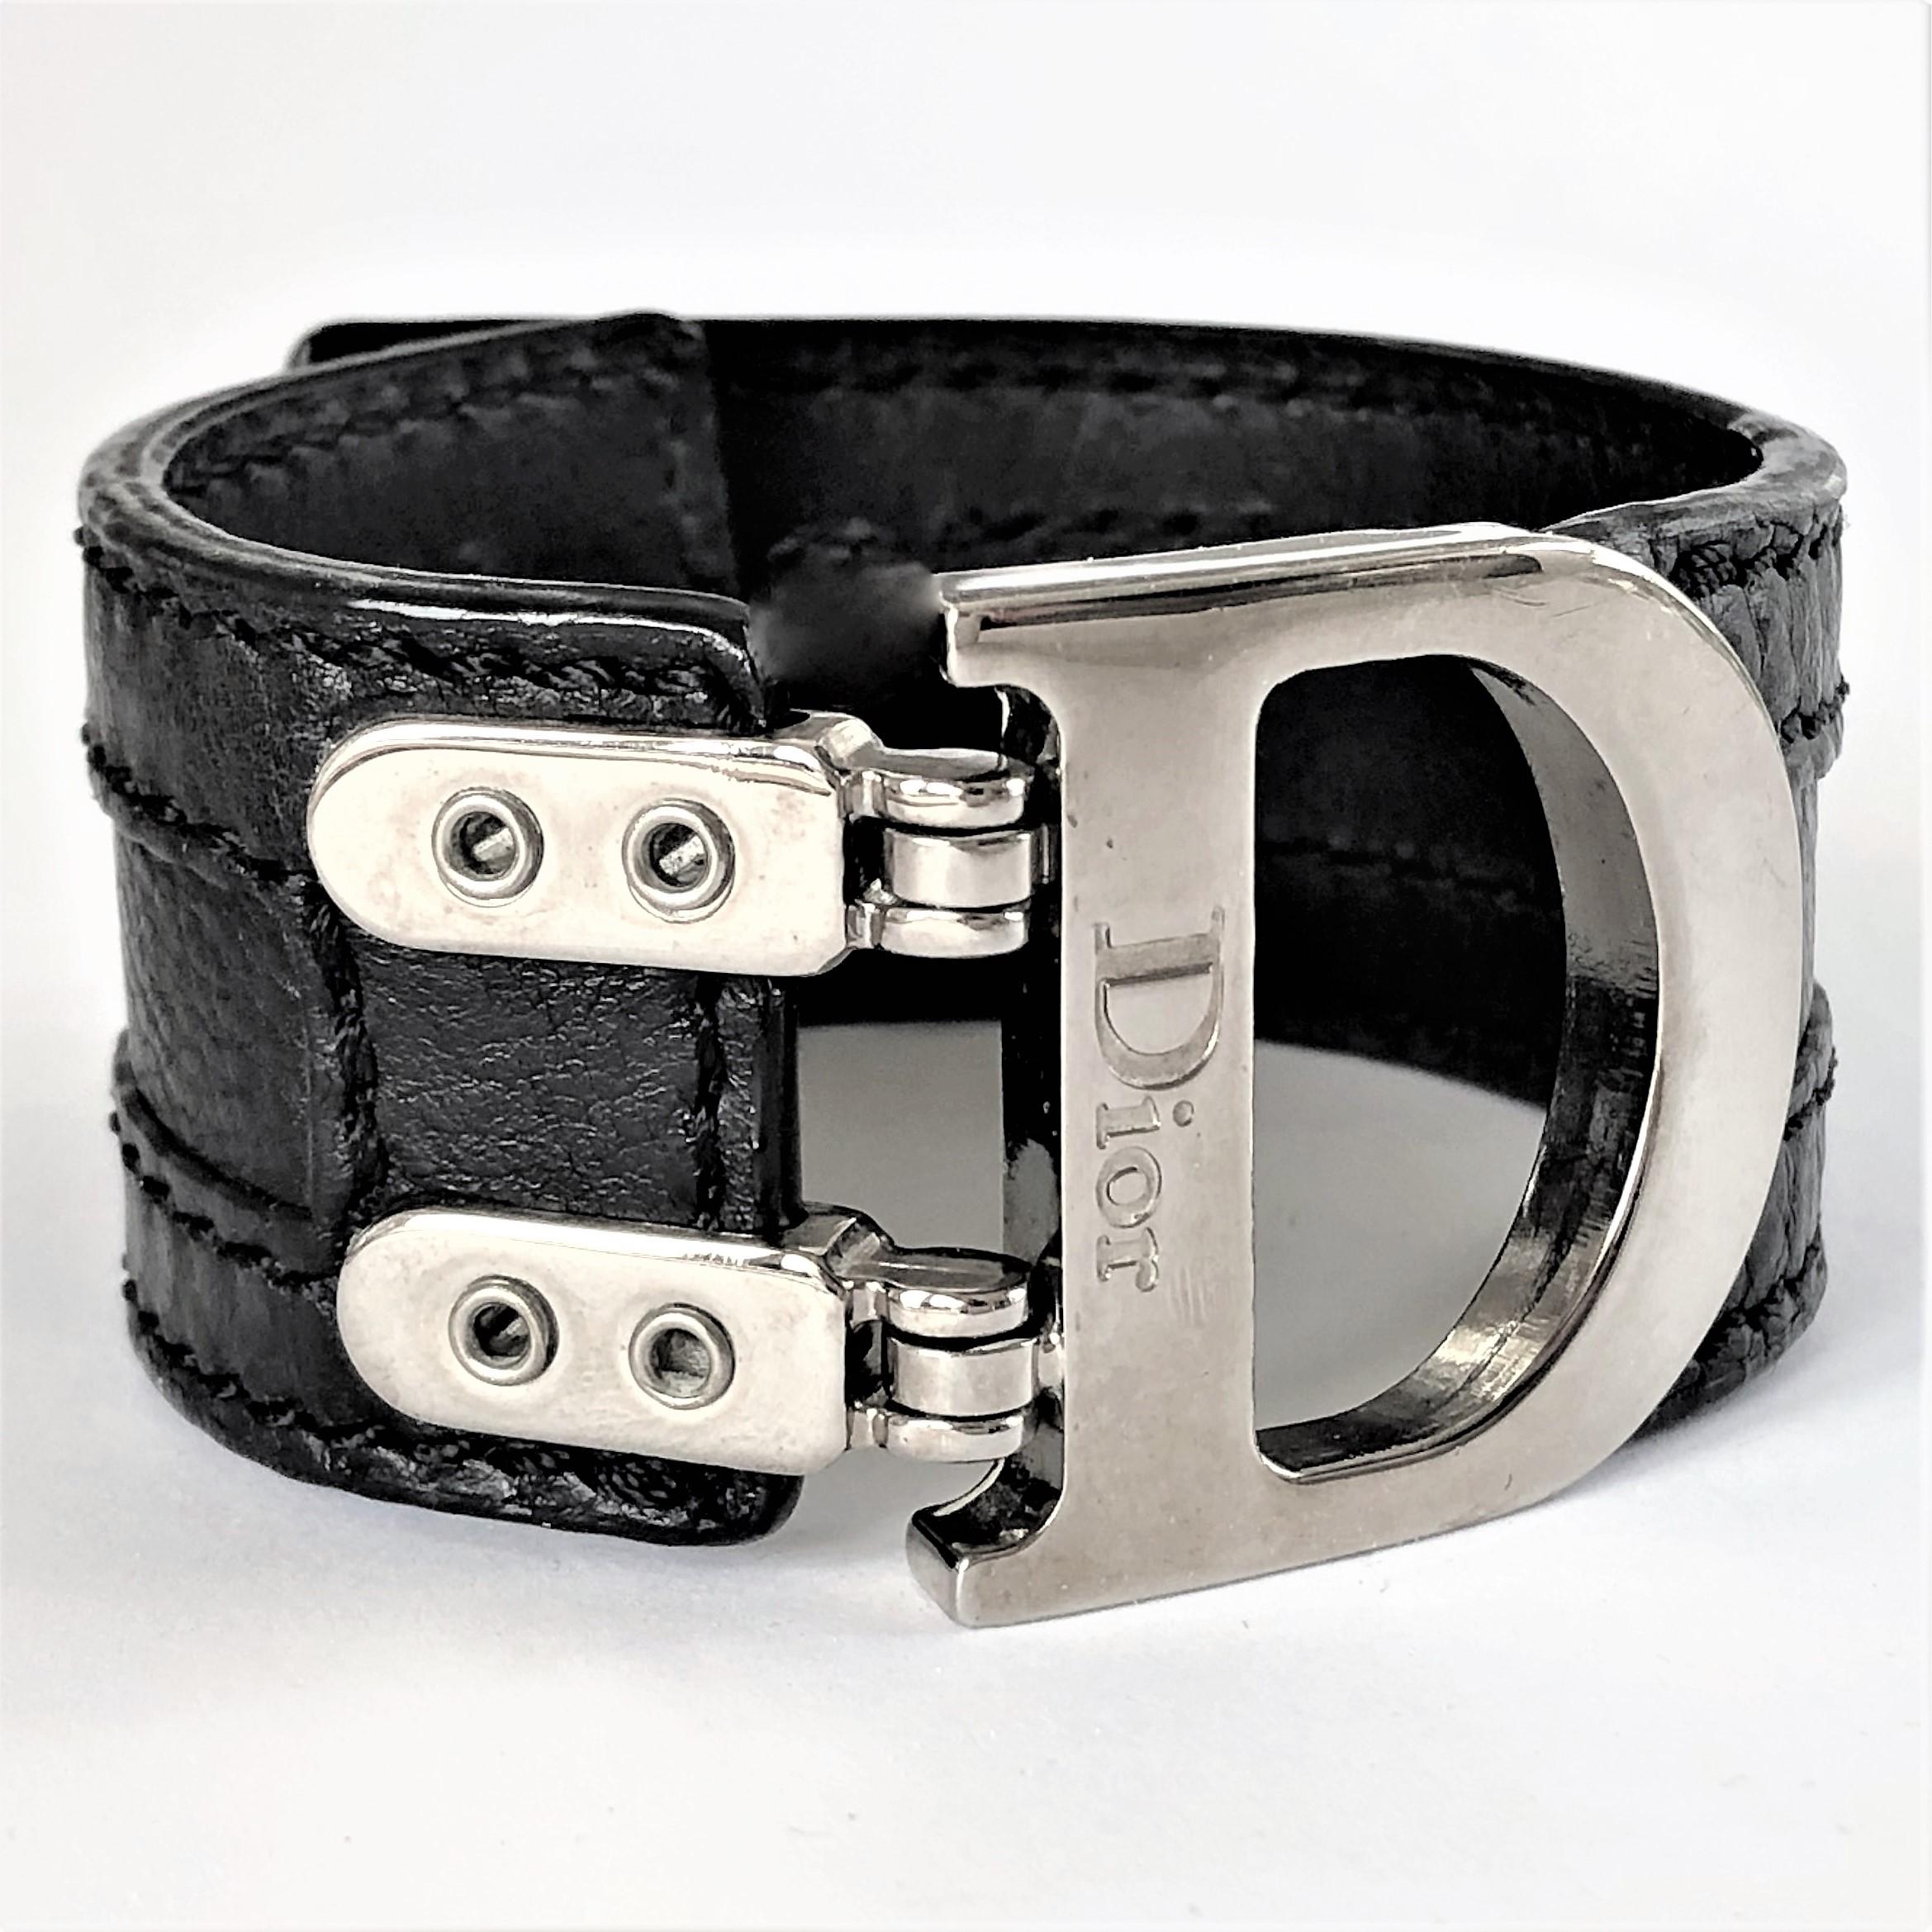 Featured in 2005-2006, this stylish, black leather cuff by Christian Dior, is a great accessory.
The Palladium finish metal buckle with the iconic 